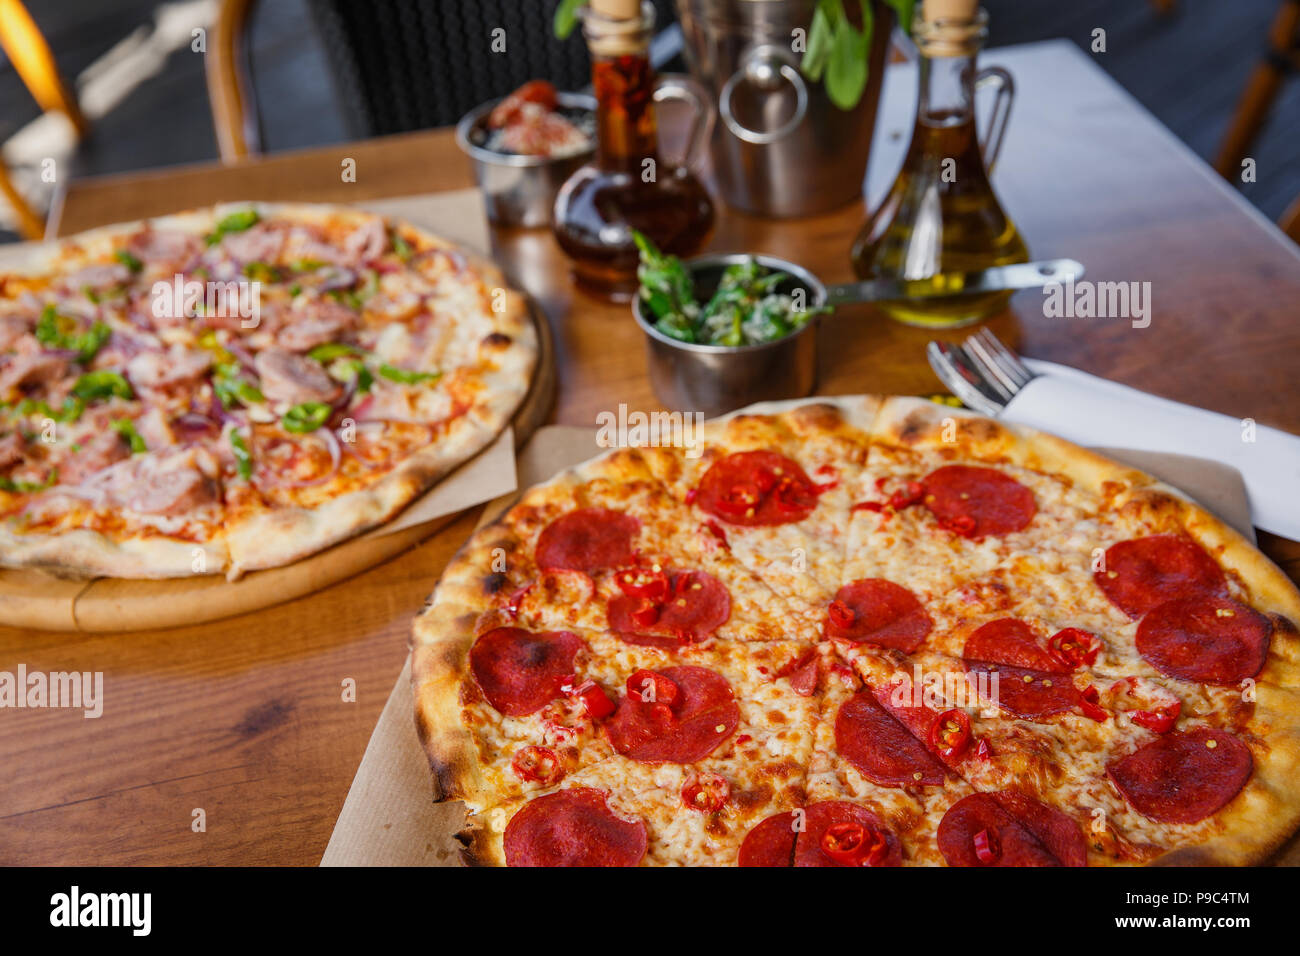 Hot delicious pepperoni pizza on wooden restaurant table. Stock Photo